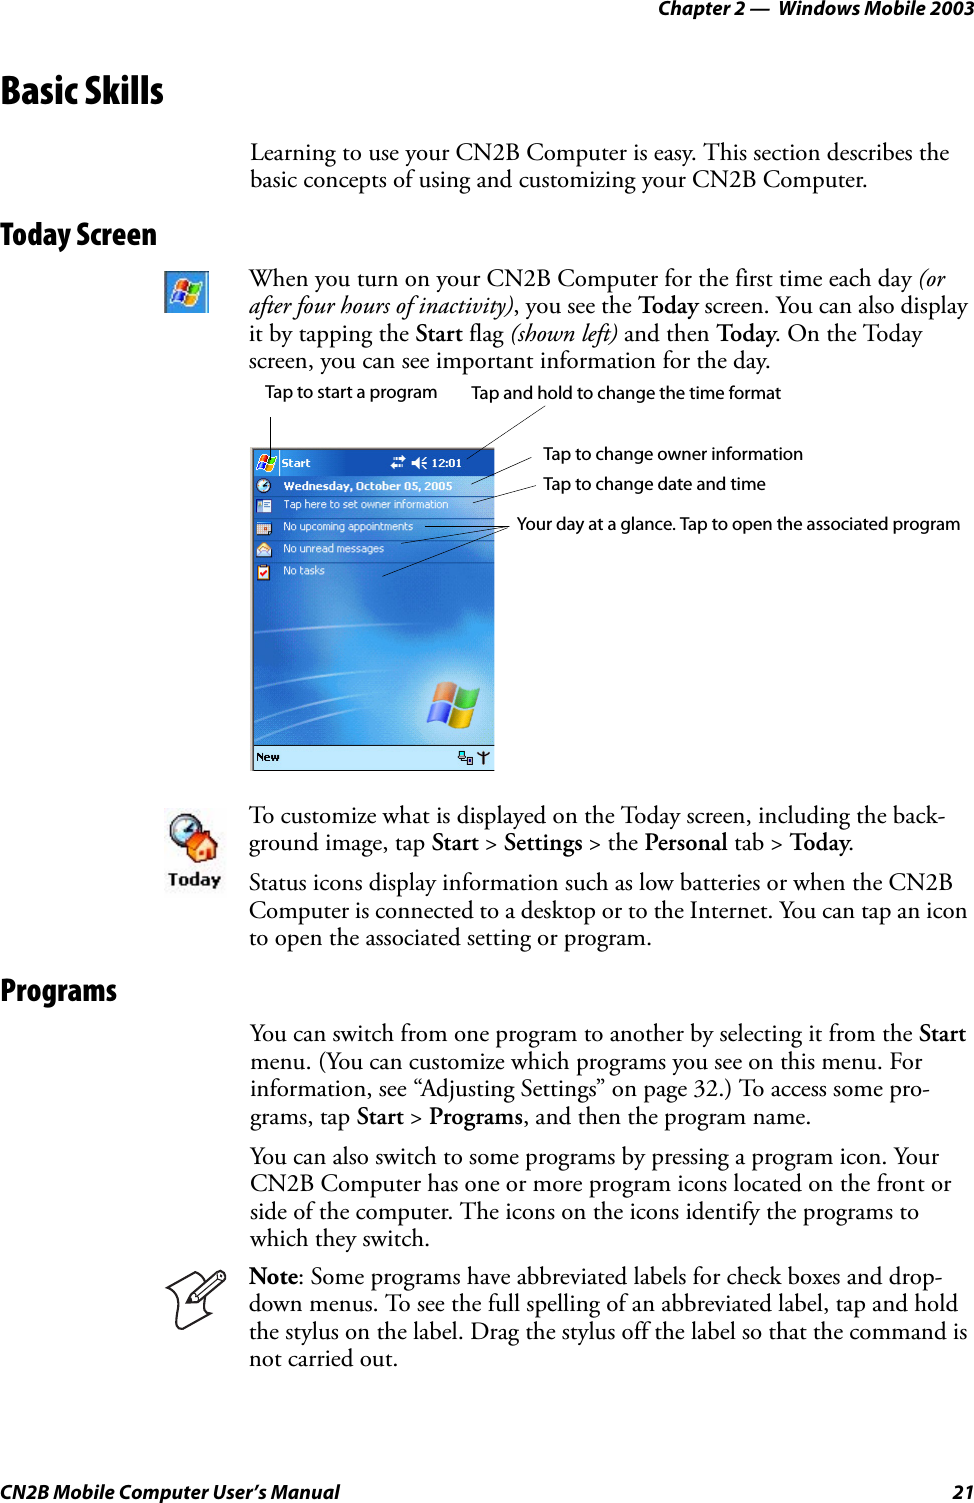 Chapter 2 —  Windows Mobile 2003CN2B Mobile Computer User’s Manual 21Basic SkillsLearning to use your CN2B Computer is easy. This section describes the basic concepts of using and customizing your CN2B Computer.Today ScreenProgramsYou can switch from one program to another by selecting it from the Start menu. (You can customize which programs you see on this menu. For information, see “Adjusting Settings” on page 32.) To access some pro-grams, tap Start &gt; Programs, and then the program name.You can also switch to some programs by pressing a program icon. Your CN2B Computer has one or more program icons located on the front or side of the computer. The icons on the icons identify the programs to which they switch.When you turn on your CN2B Computer for the first time each day (or after four hours of inactivity), you see the To d a y  screen. You can also display it by tapping the Start flag (shown left) and then To d a y. On the Today screen, you can see important information for the day.To customize what is displayed on the Today screen, including the back-ground image, tap Start &gt; Settings &gt; the Personal tab &gt; To d ay.Status icons display information such as low batteries or when the CN2B Computer is connected to a desktop or to the Internet. You can tap an icon to open the associated setting or program.Note: Some programs have abbreviated labels for check boxes and drop-down menus. To see the full spelling of an abbreviated label, tap and hold the stylus on the label. Drag the stylus off the label so that the command is not carried out.Tap to start a program Tap and hold to change the time formatTap to change date and timeTap to change owner informationYour day at a glance. Tap to open the associated program